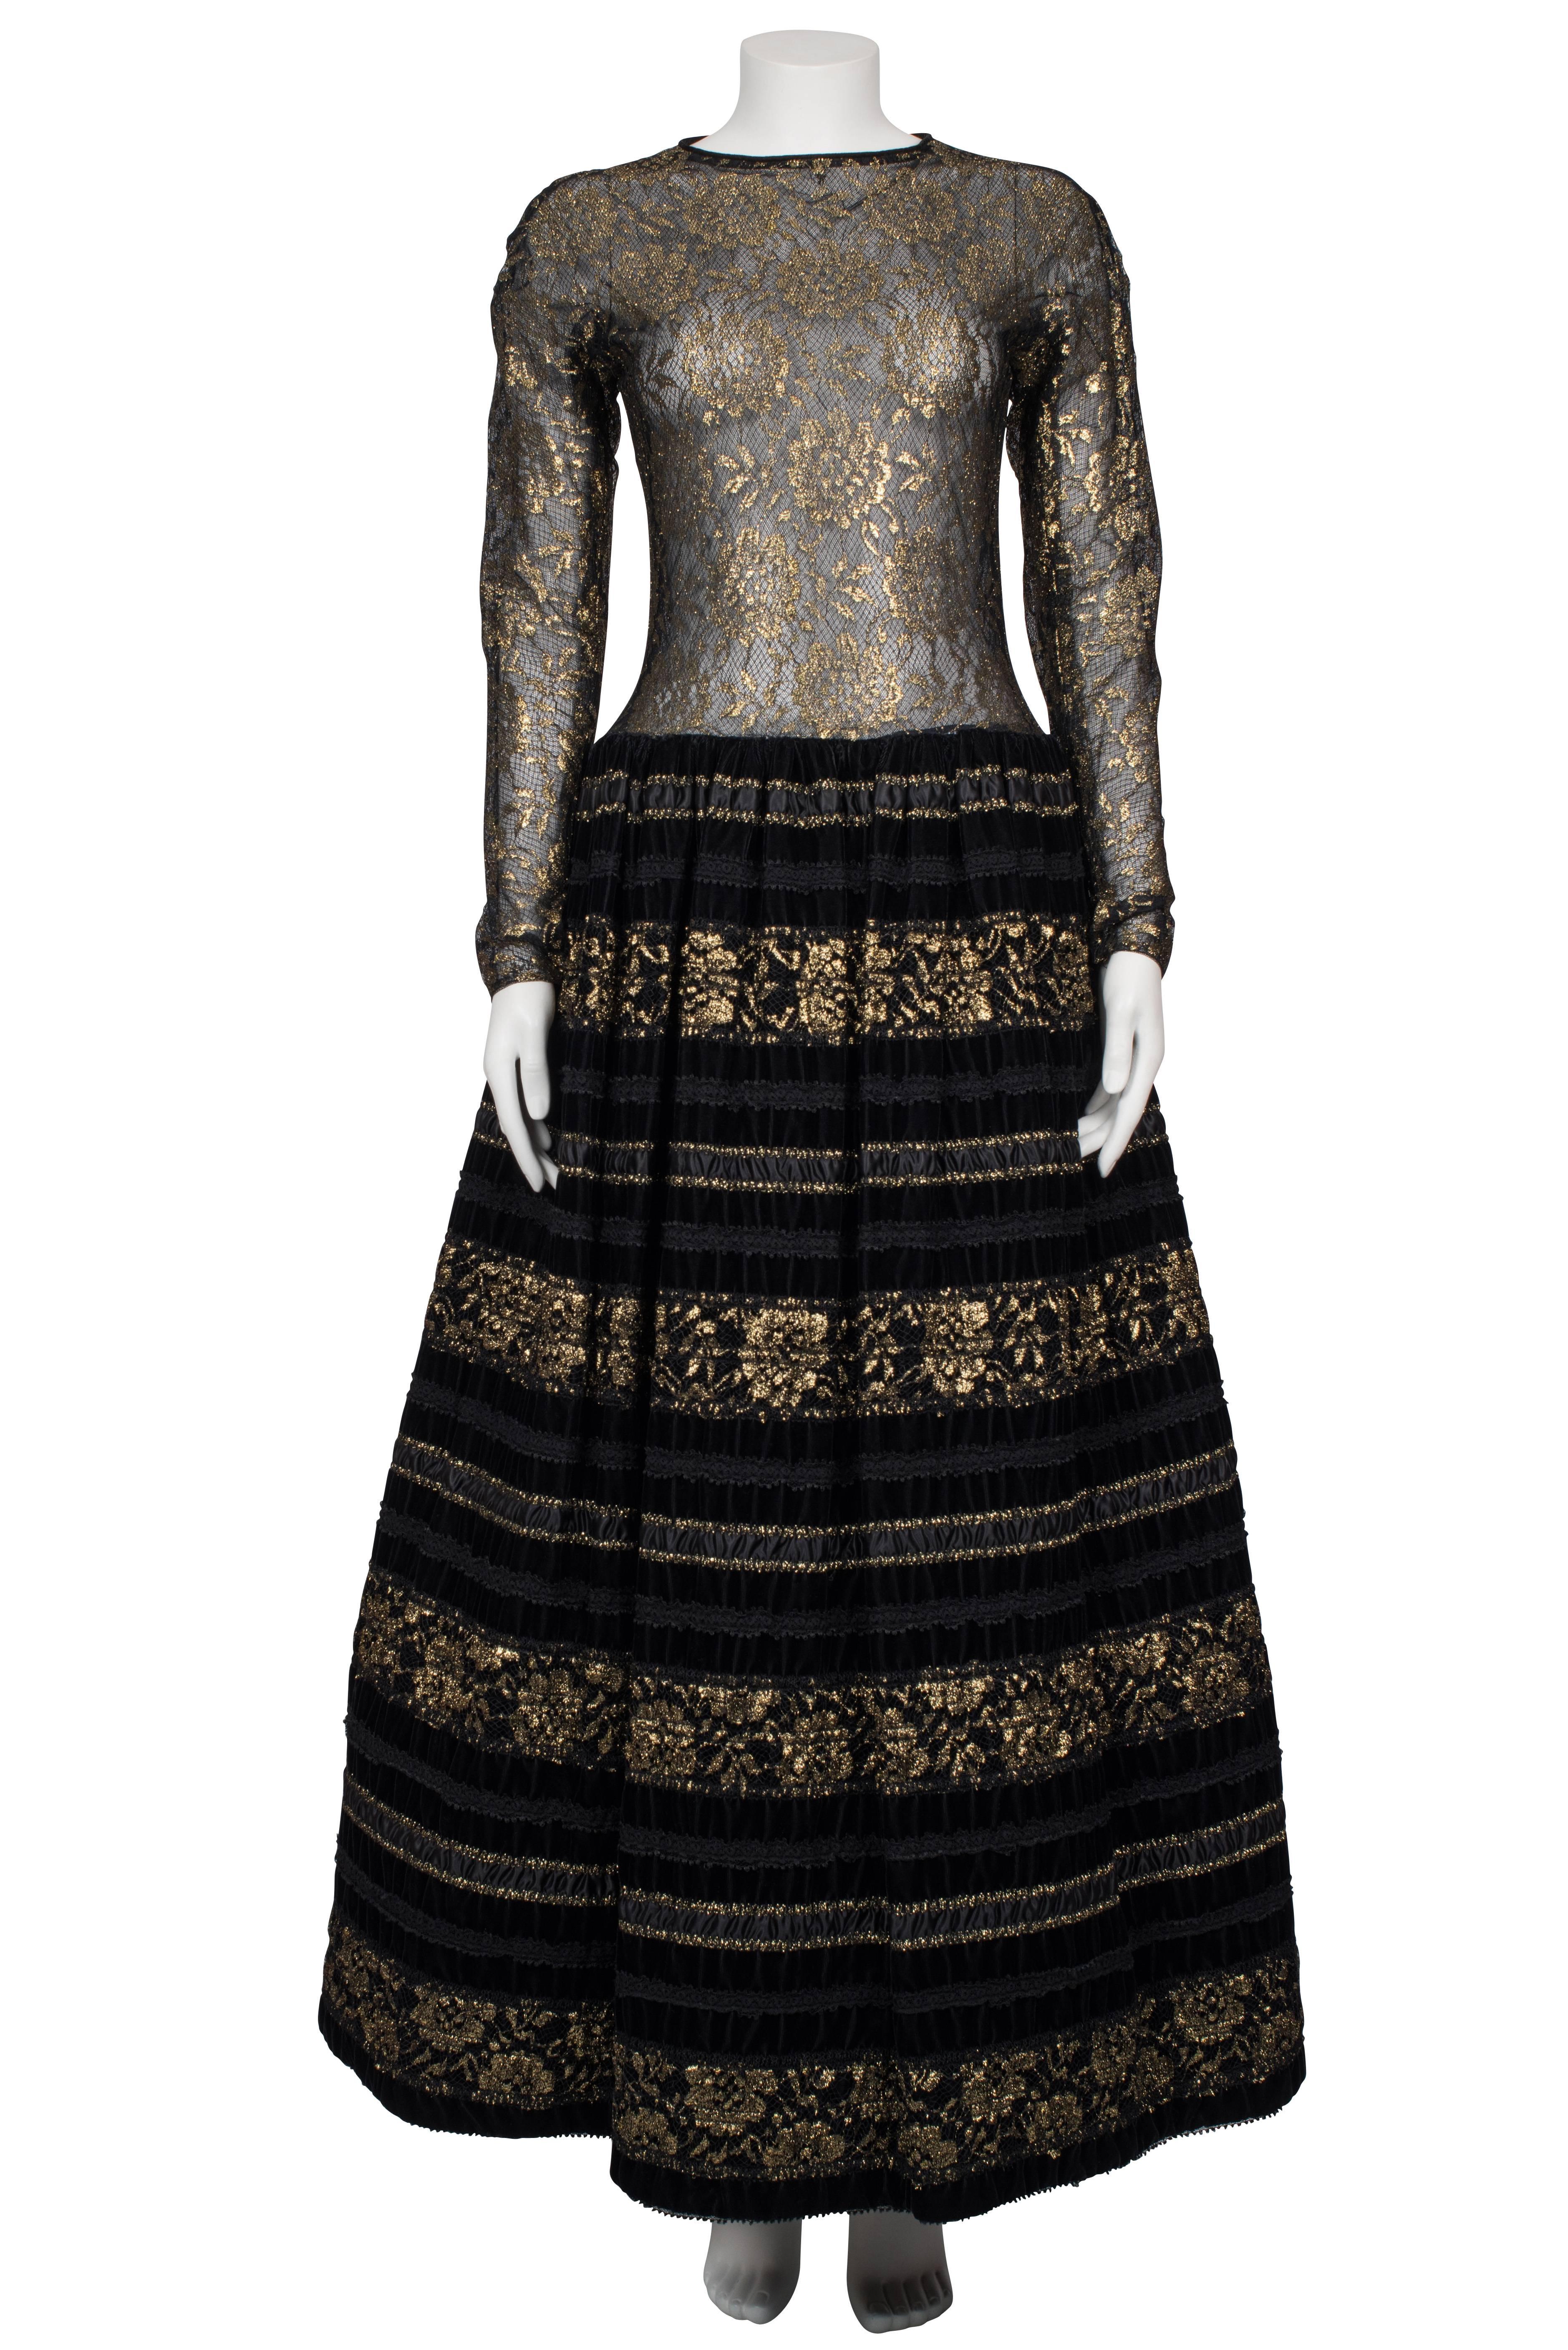 Women's 1960's Arnold Scaasi Couture Black & Gold Metallic Lace Gown For Sale